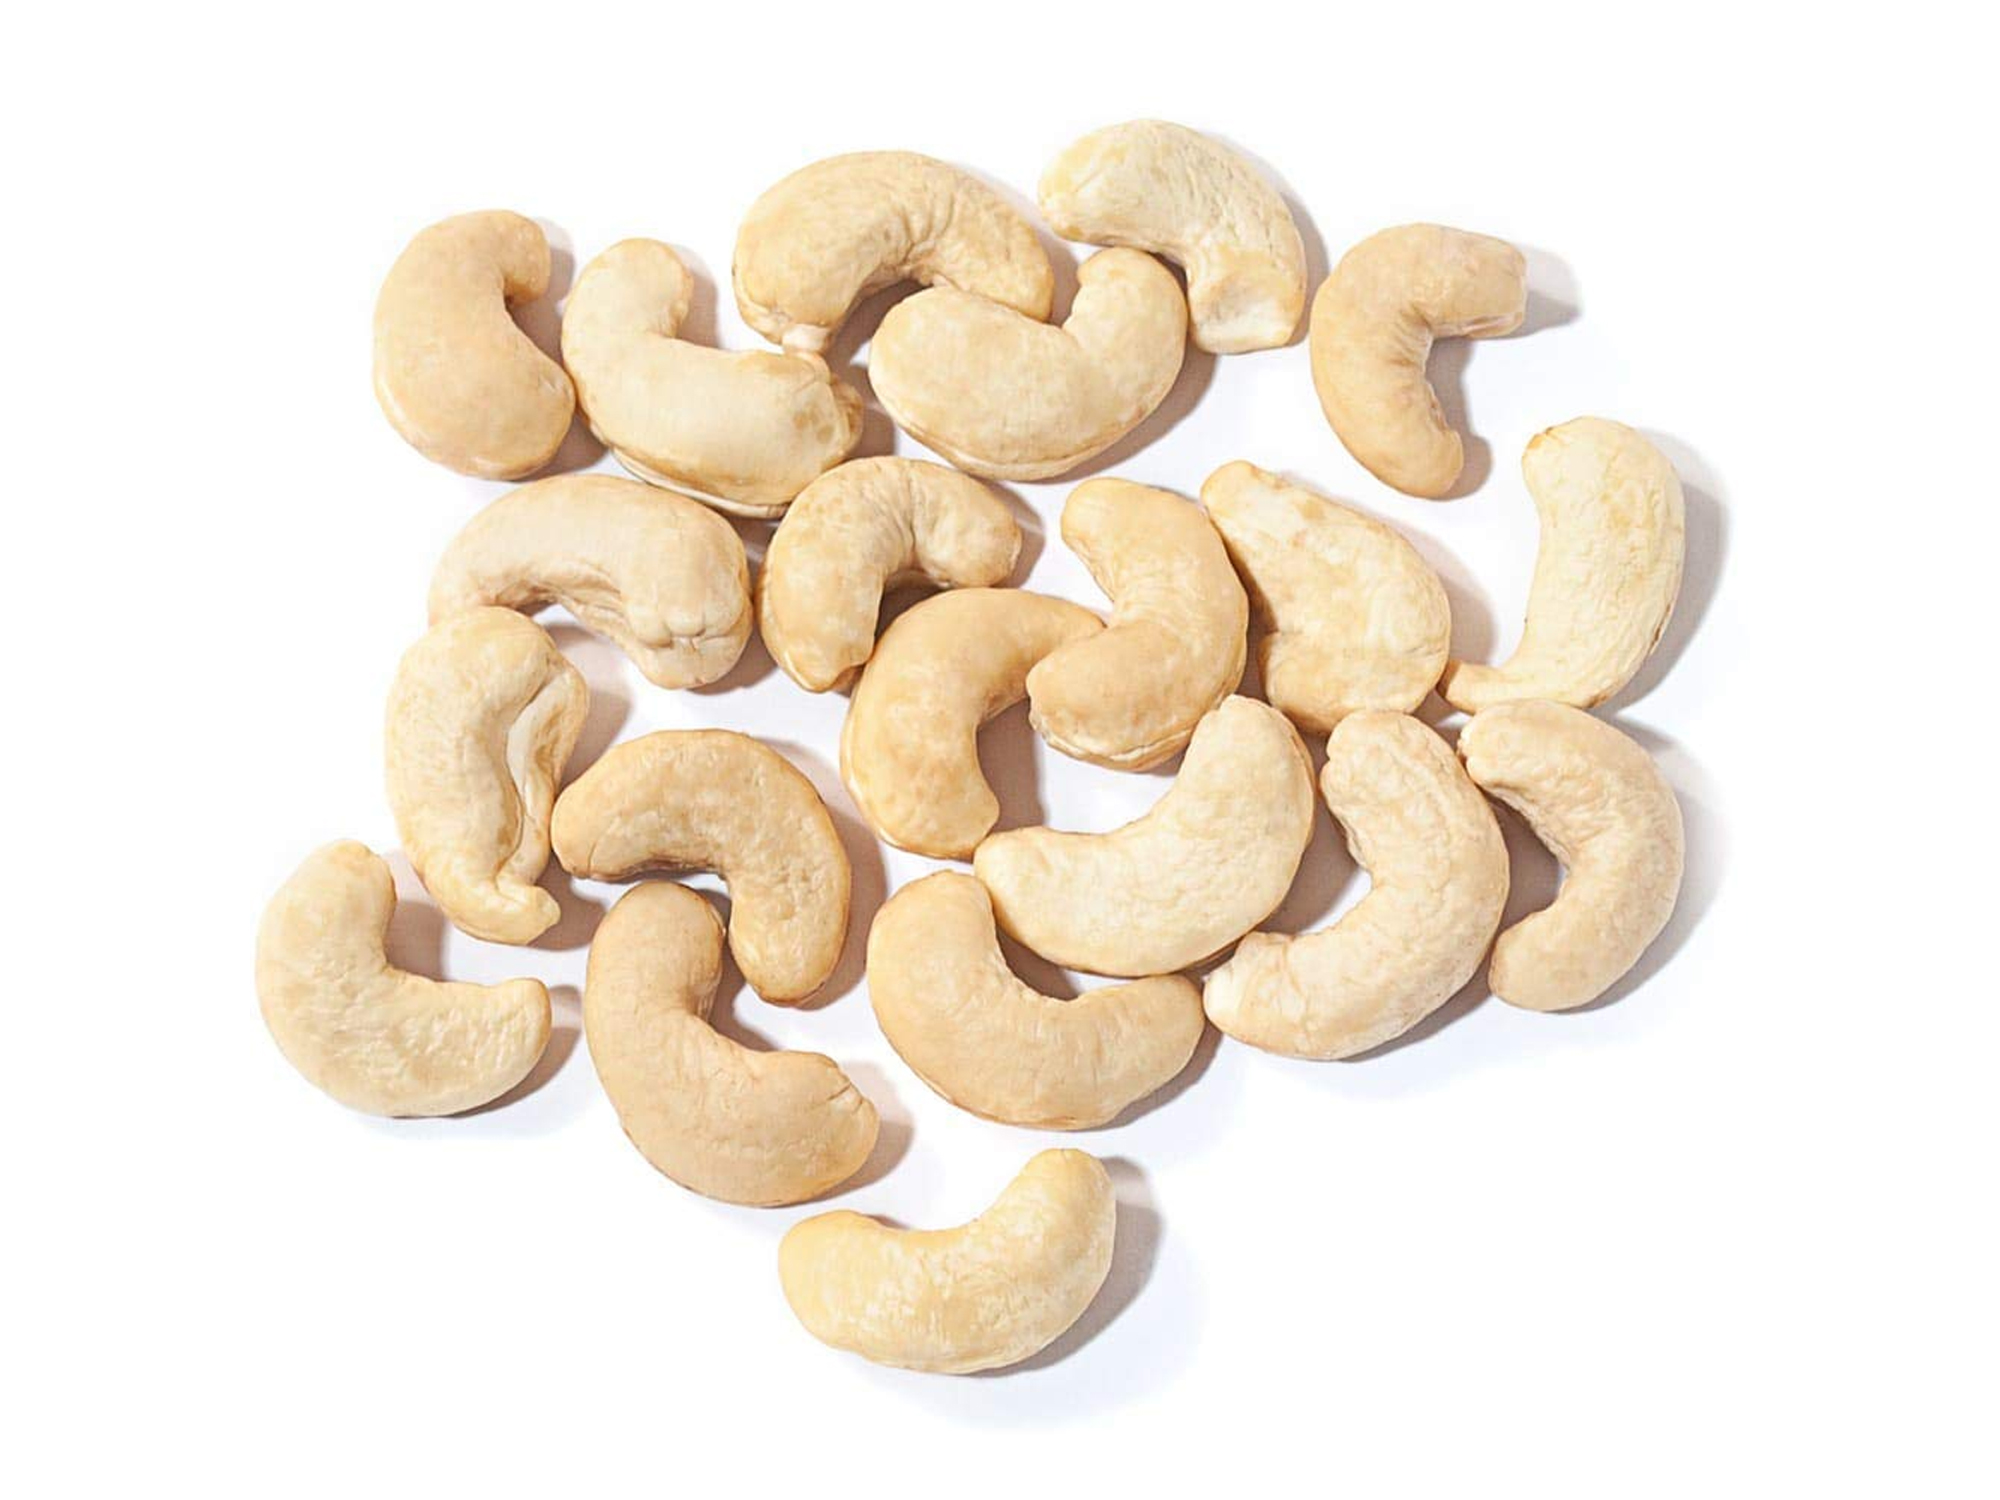 Organic Cashews by Food To Live ® (Non-GMO, Whole, Raw, Kosher, Vegan, Unsalted)